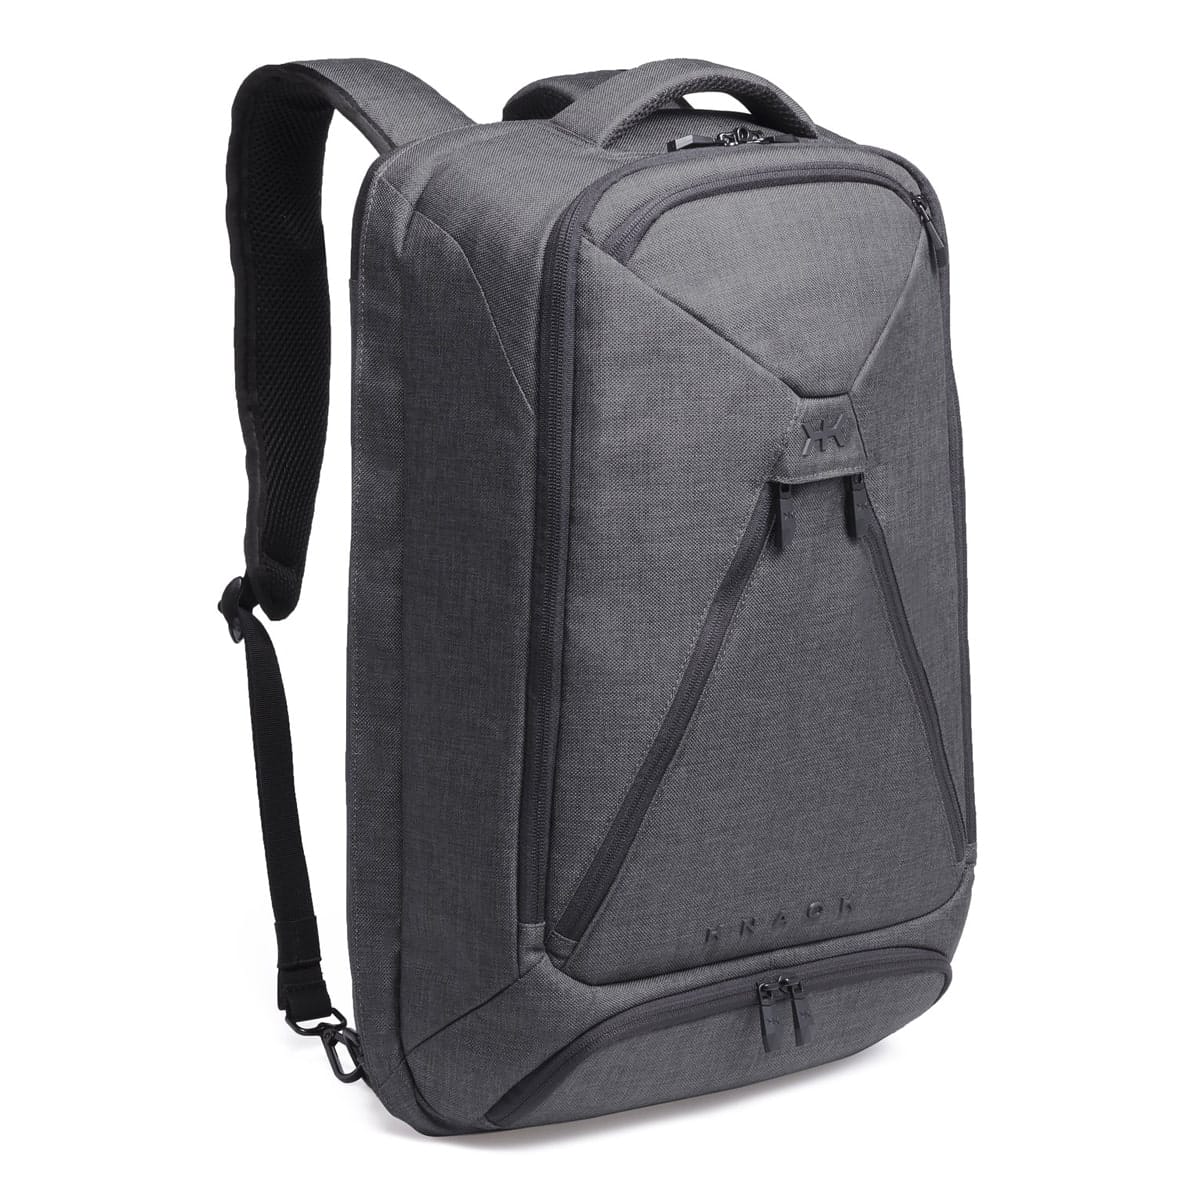 Best Expandable Travel Backpack